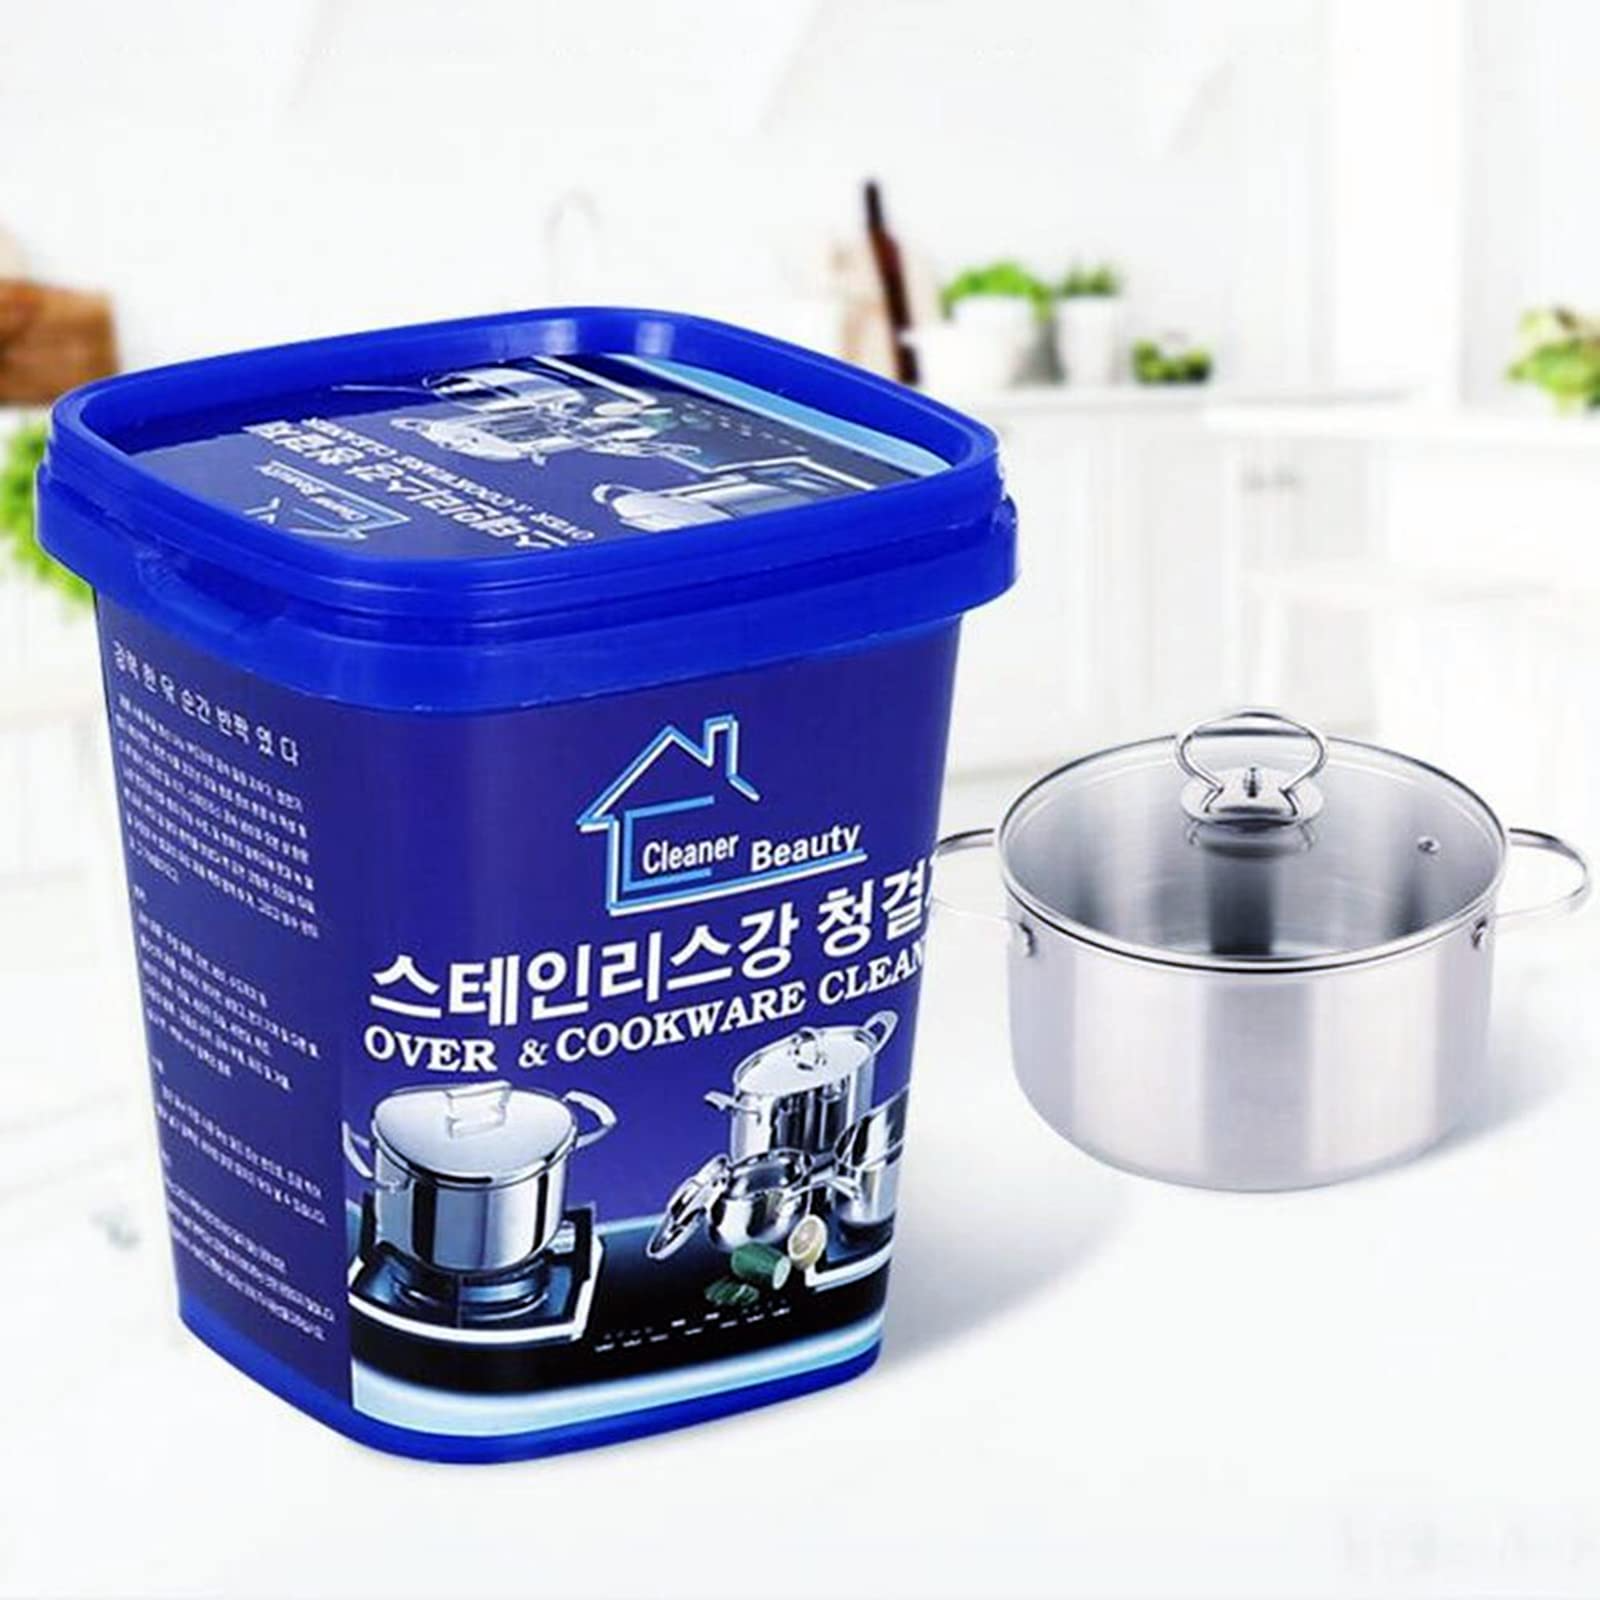 Stainless Steel Cleaning Paste, Powerful Cookware Rust Removal Cleaner,  Multi-purpose Cleaner and Polishing Agent, Kitchen Cleaning Oil Stains,  Remove ...